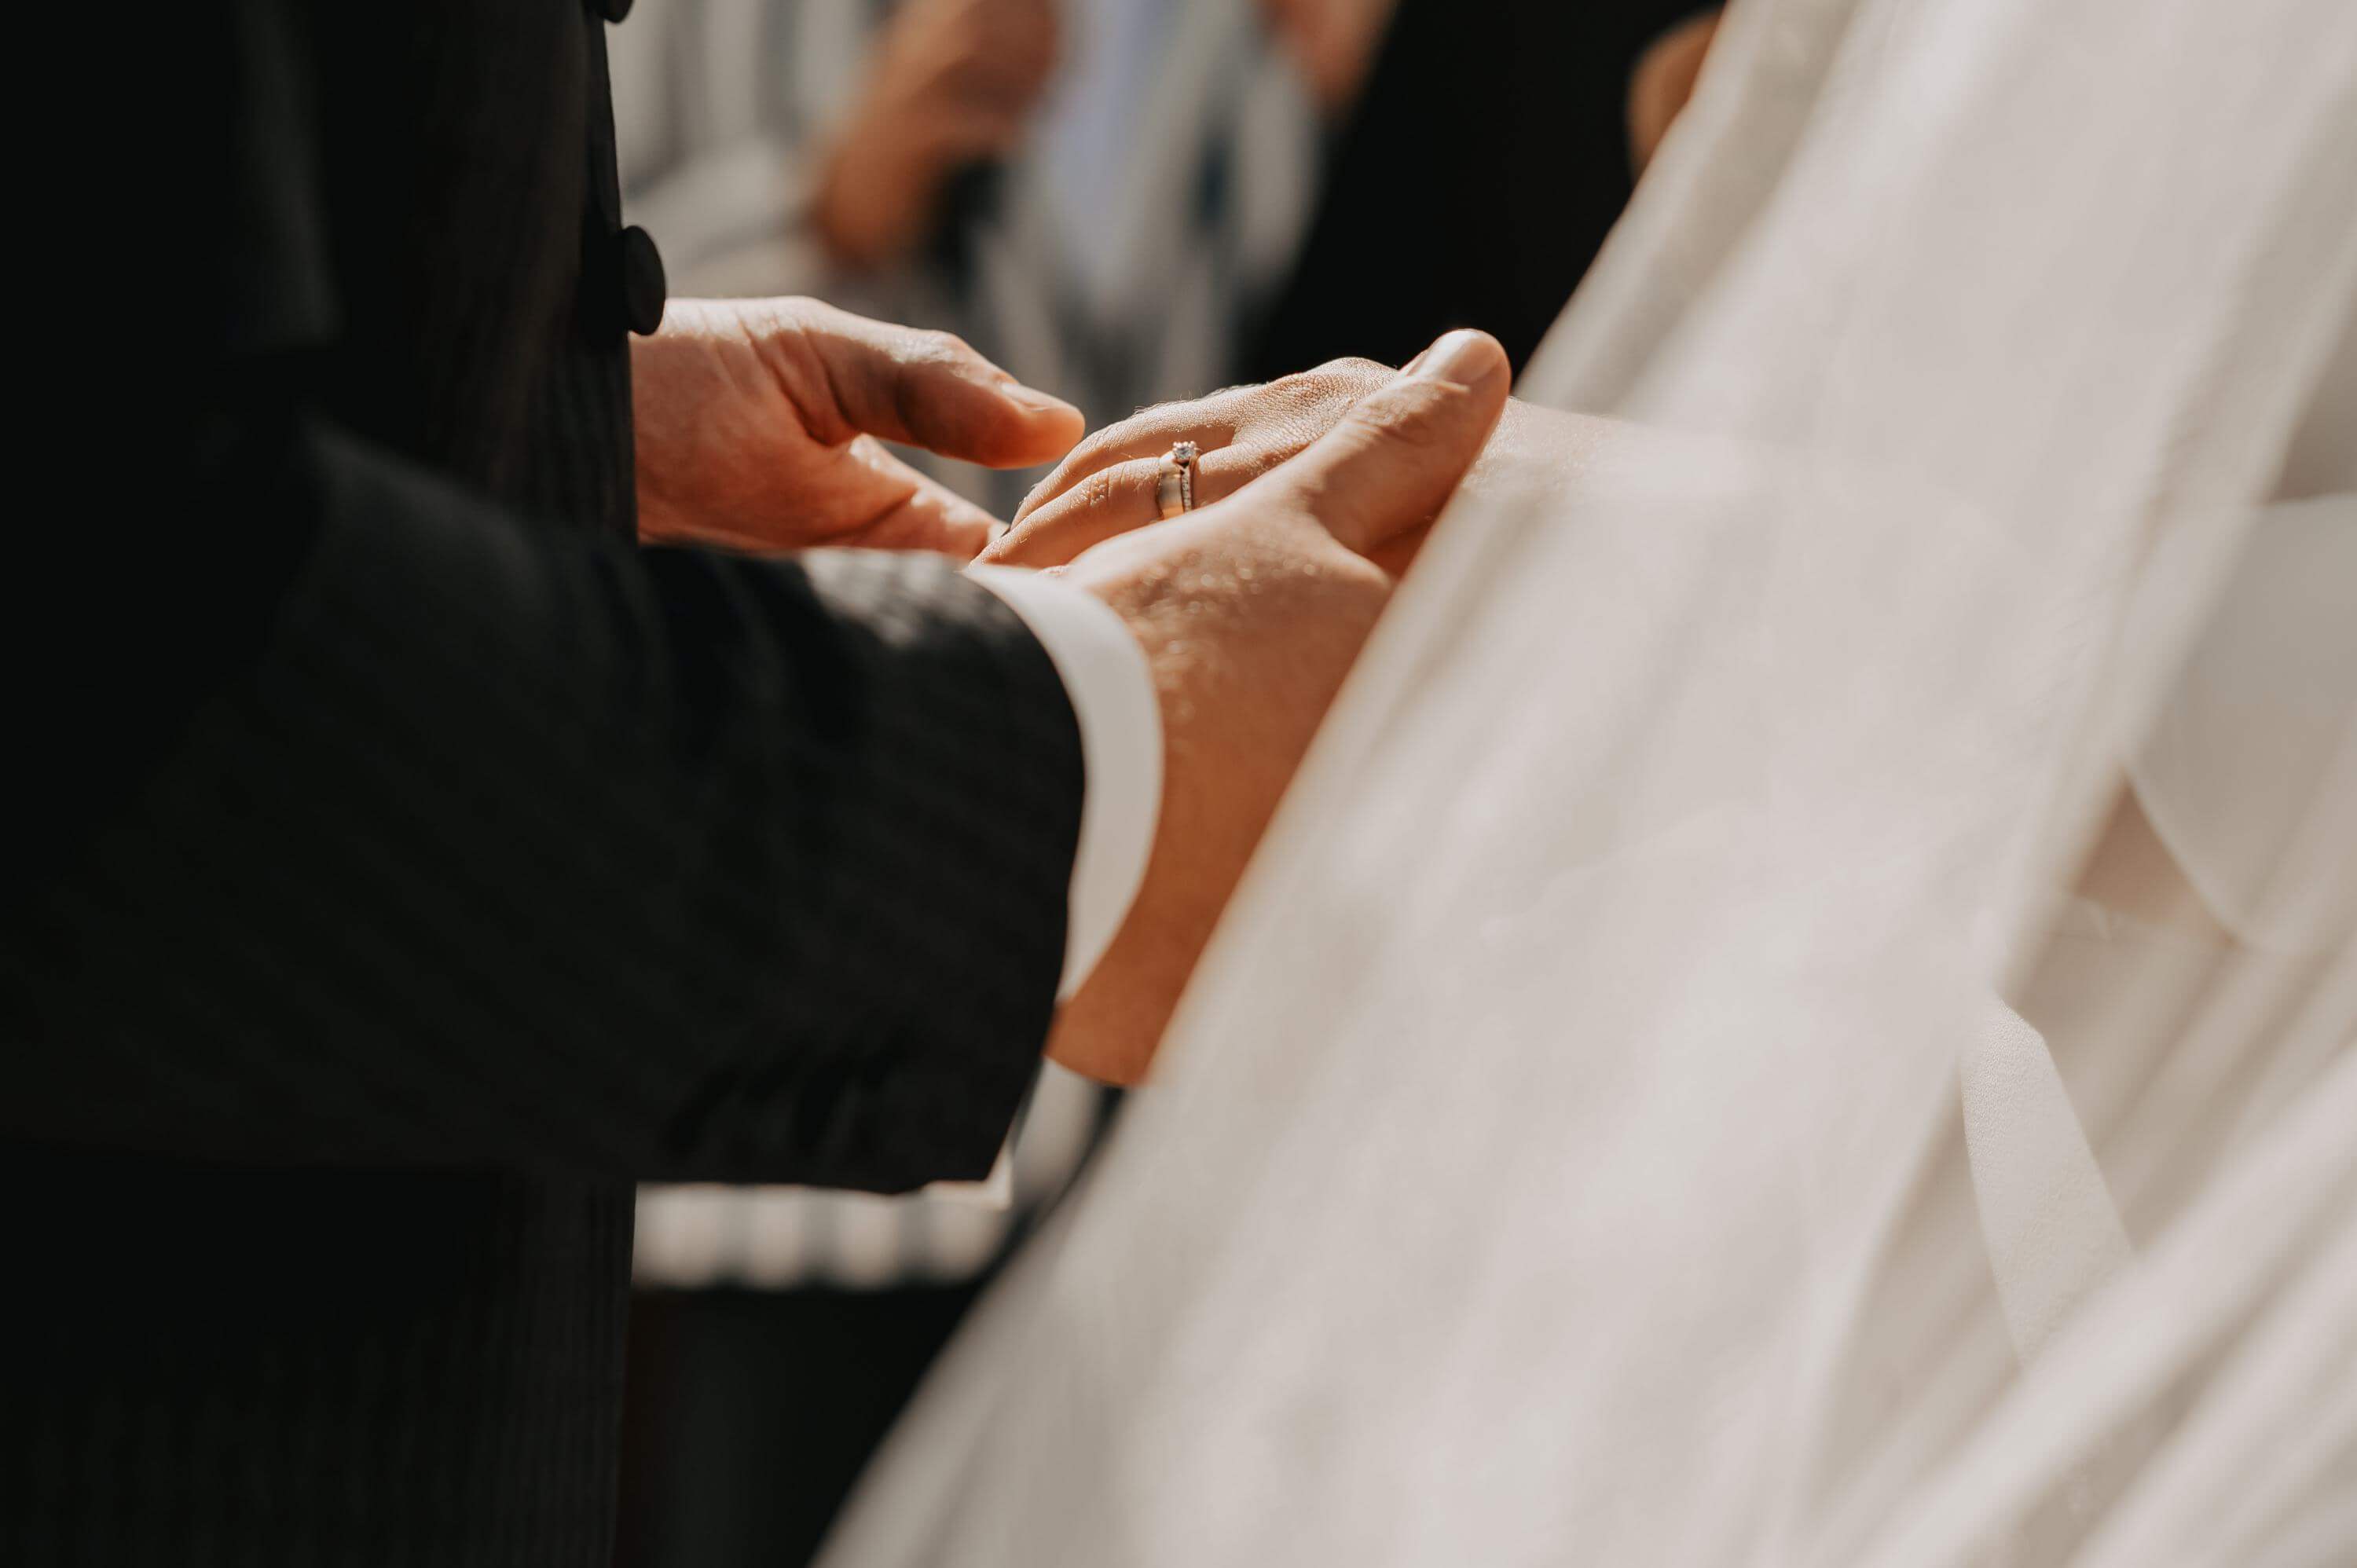 Close-up of the bride's hand with an attached diamond wedding ring being held by the groom himself.